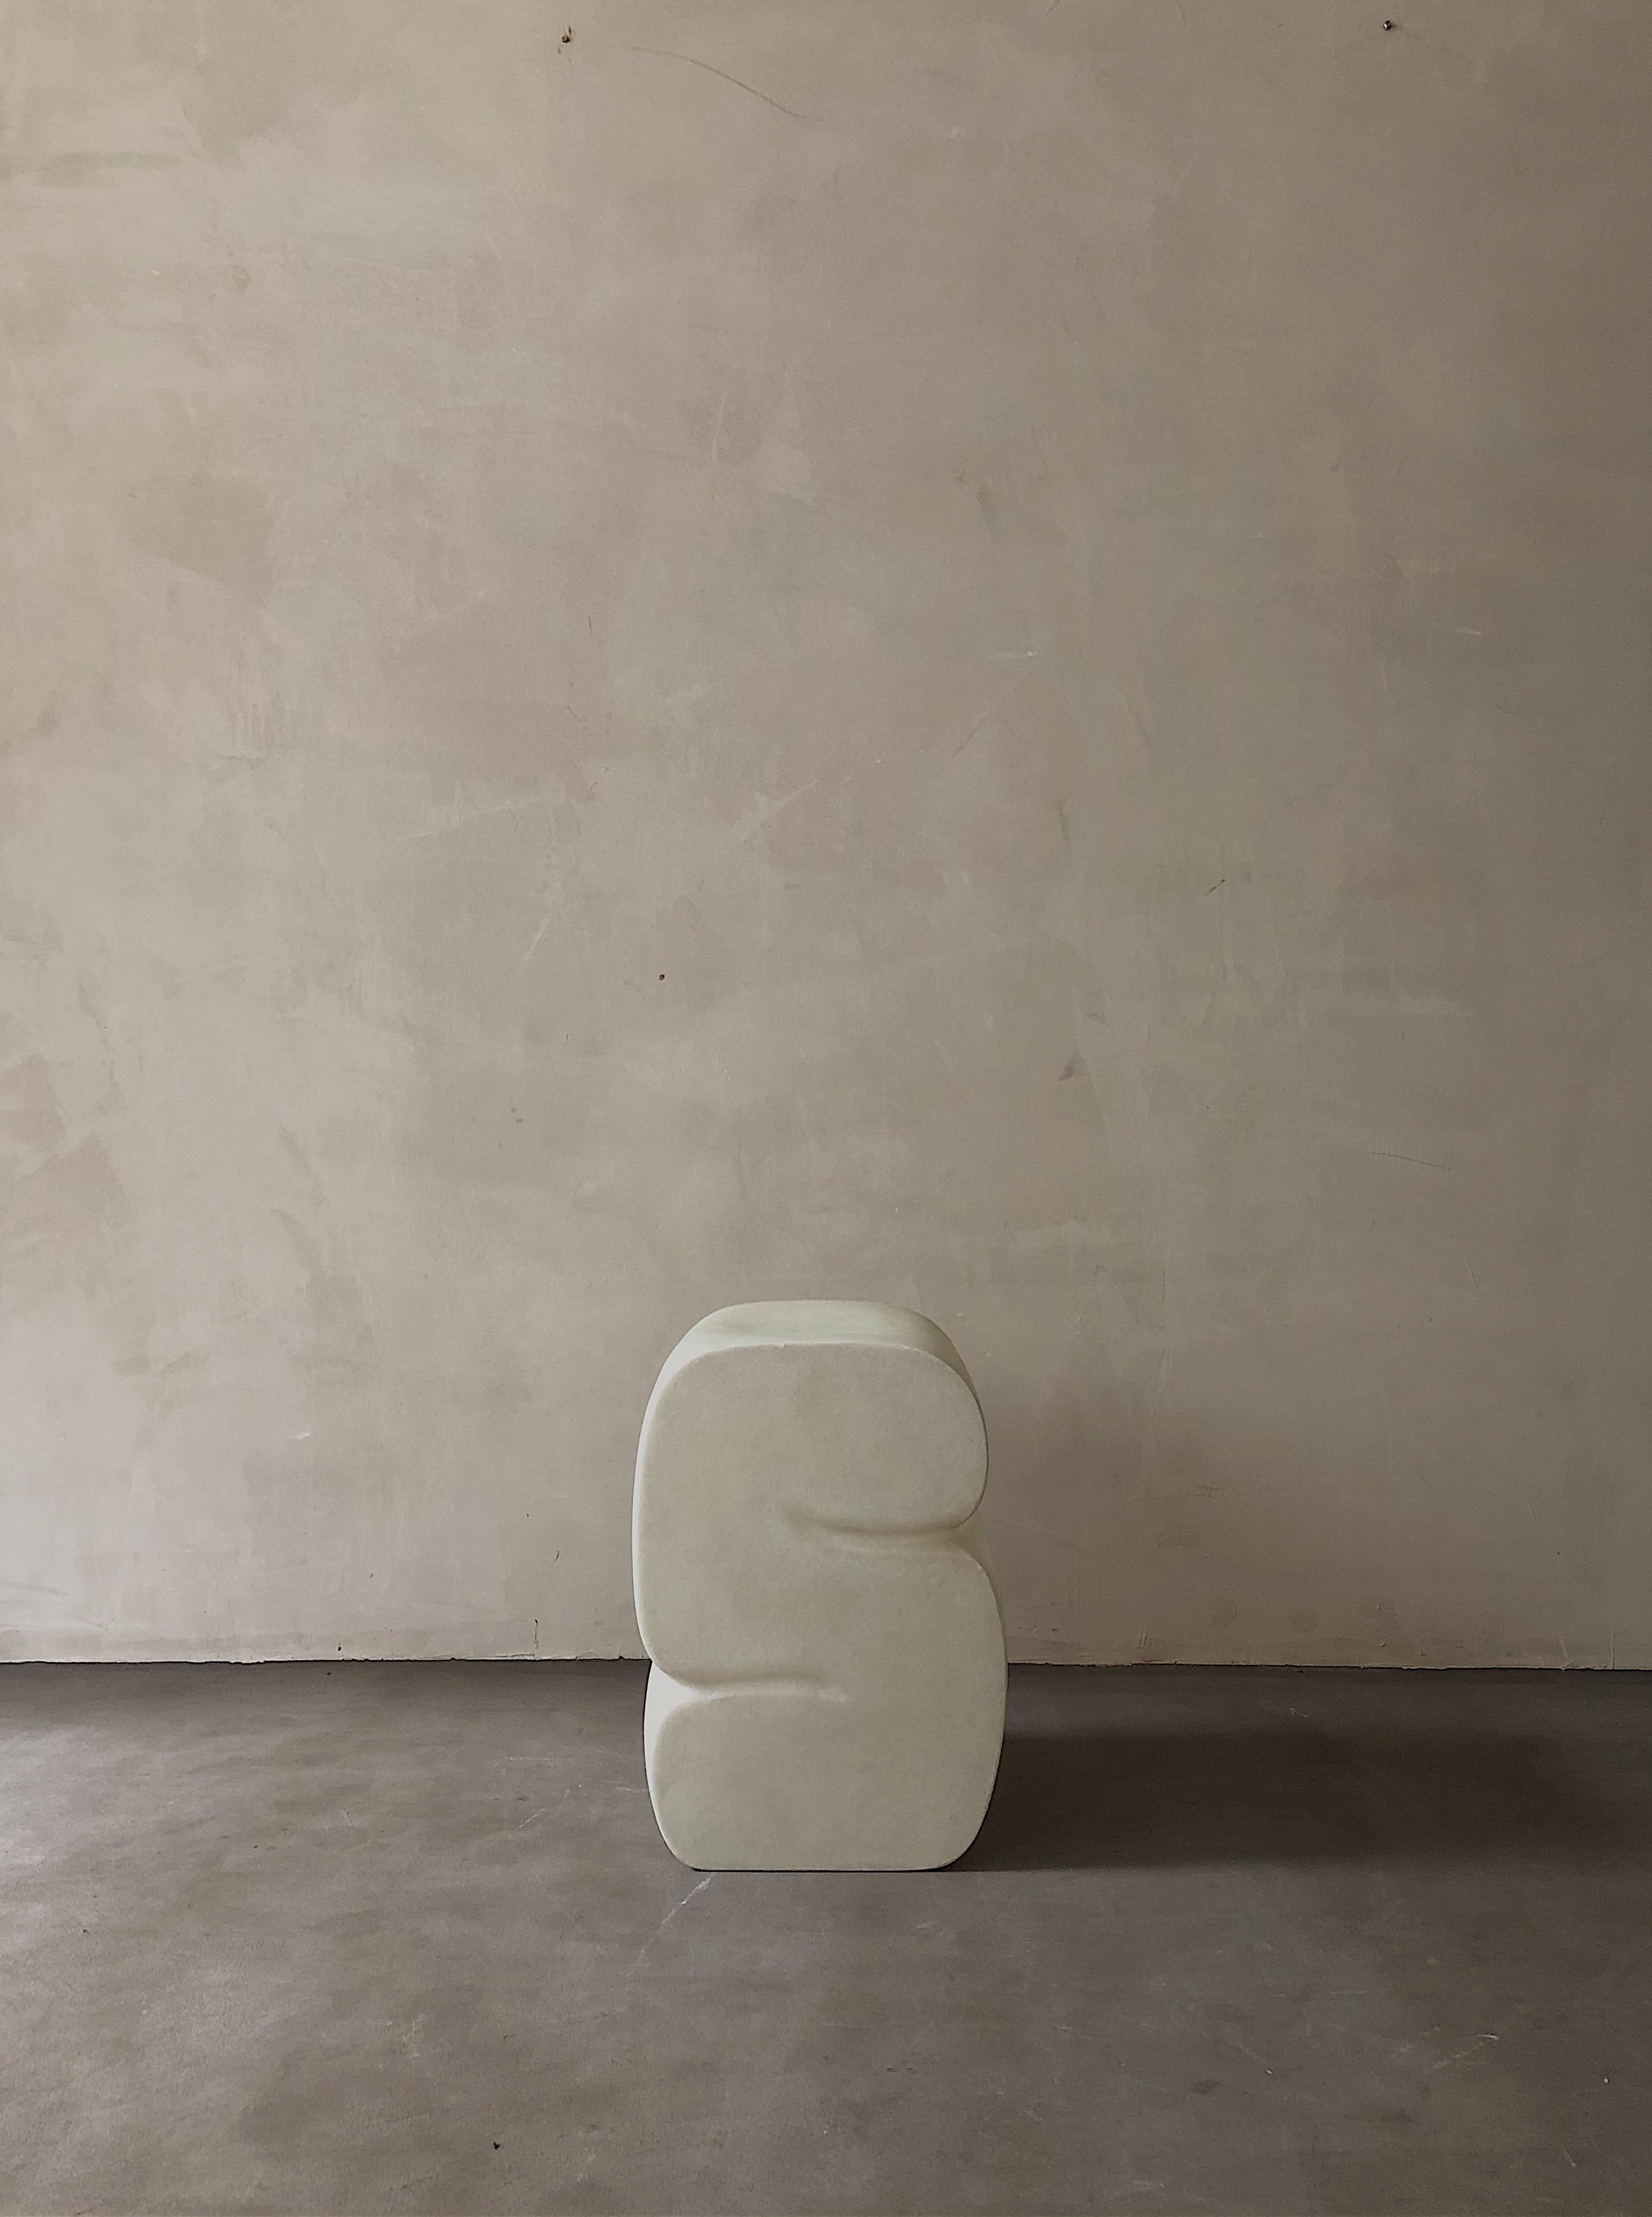 White stool by kar
Materials: FRP.
Dimensions: 32 x 32 x 45 cm.

It shapes in a curl-up position, casual meanwhile restrained. The side designed as a cross-section of the furniture to present the curve and texture.

Kar- is the root of Sanskrit